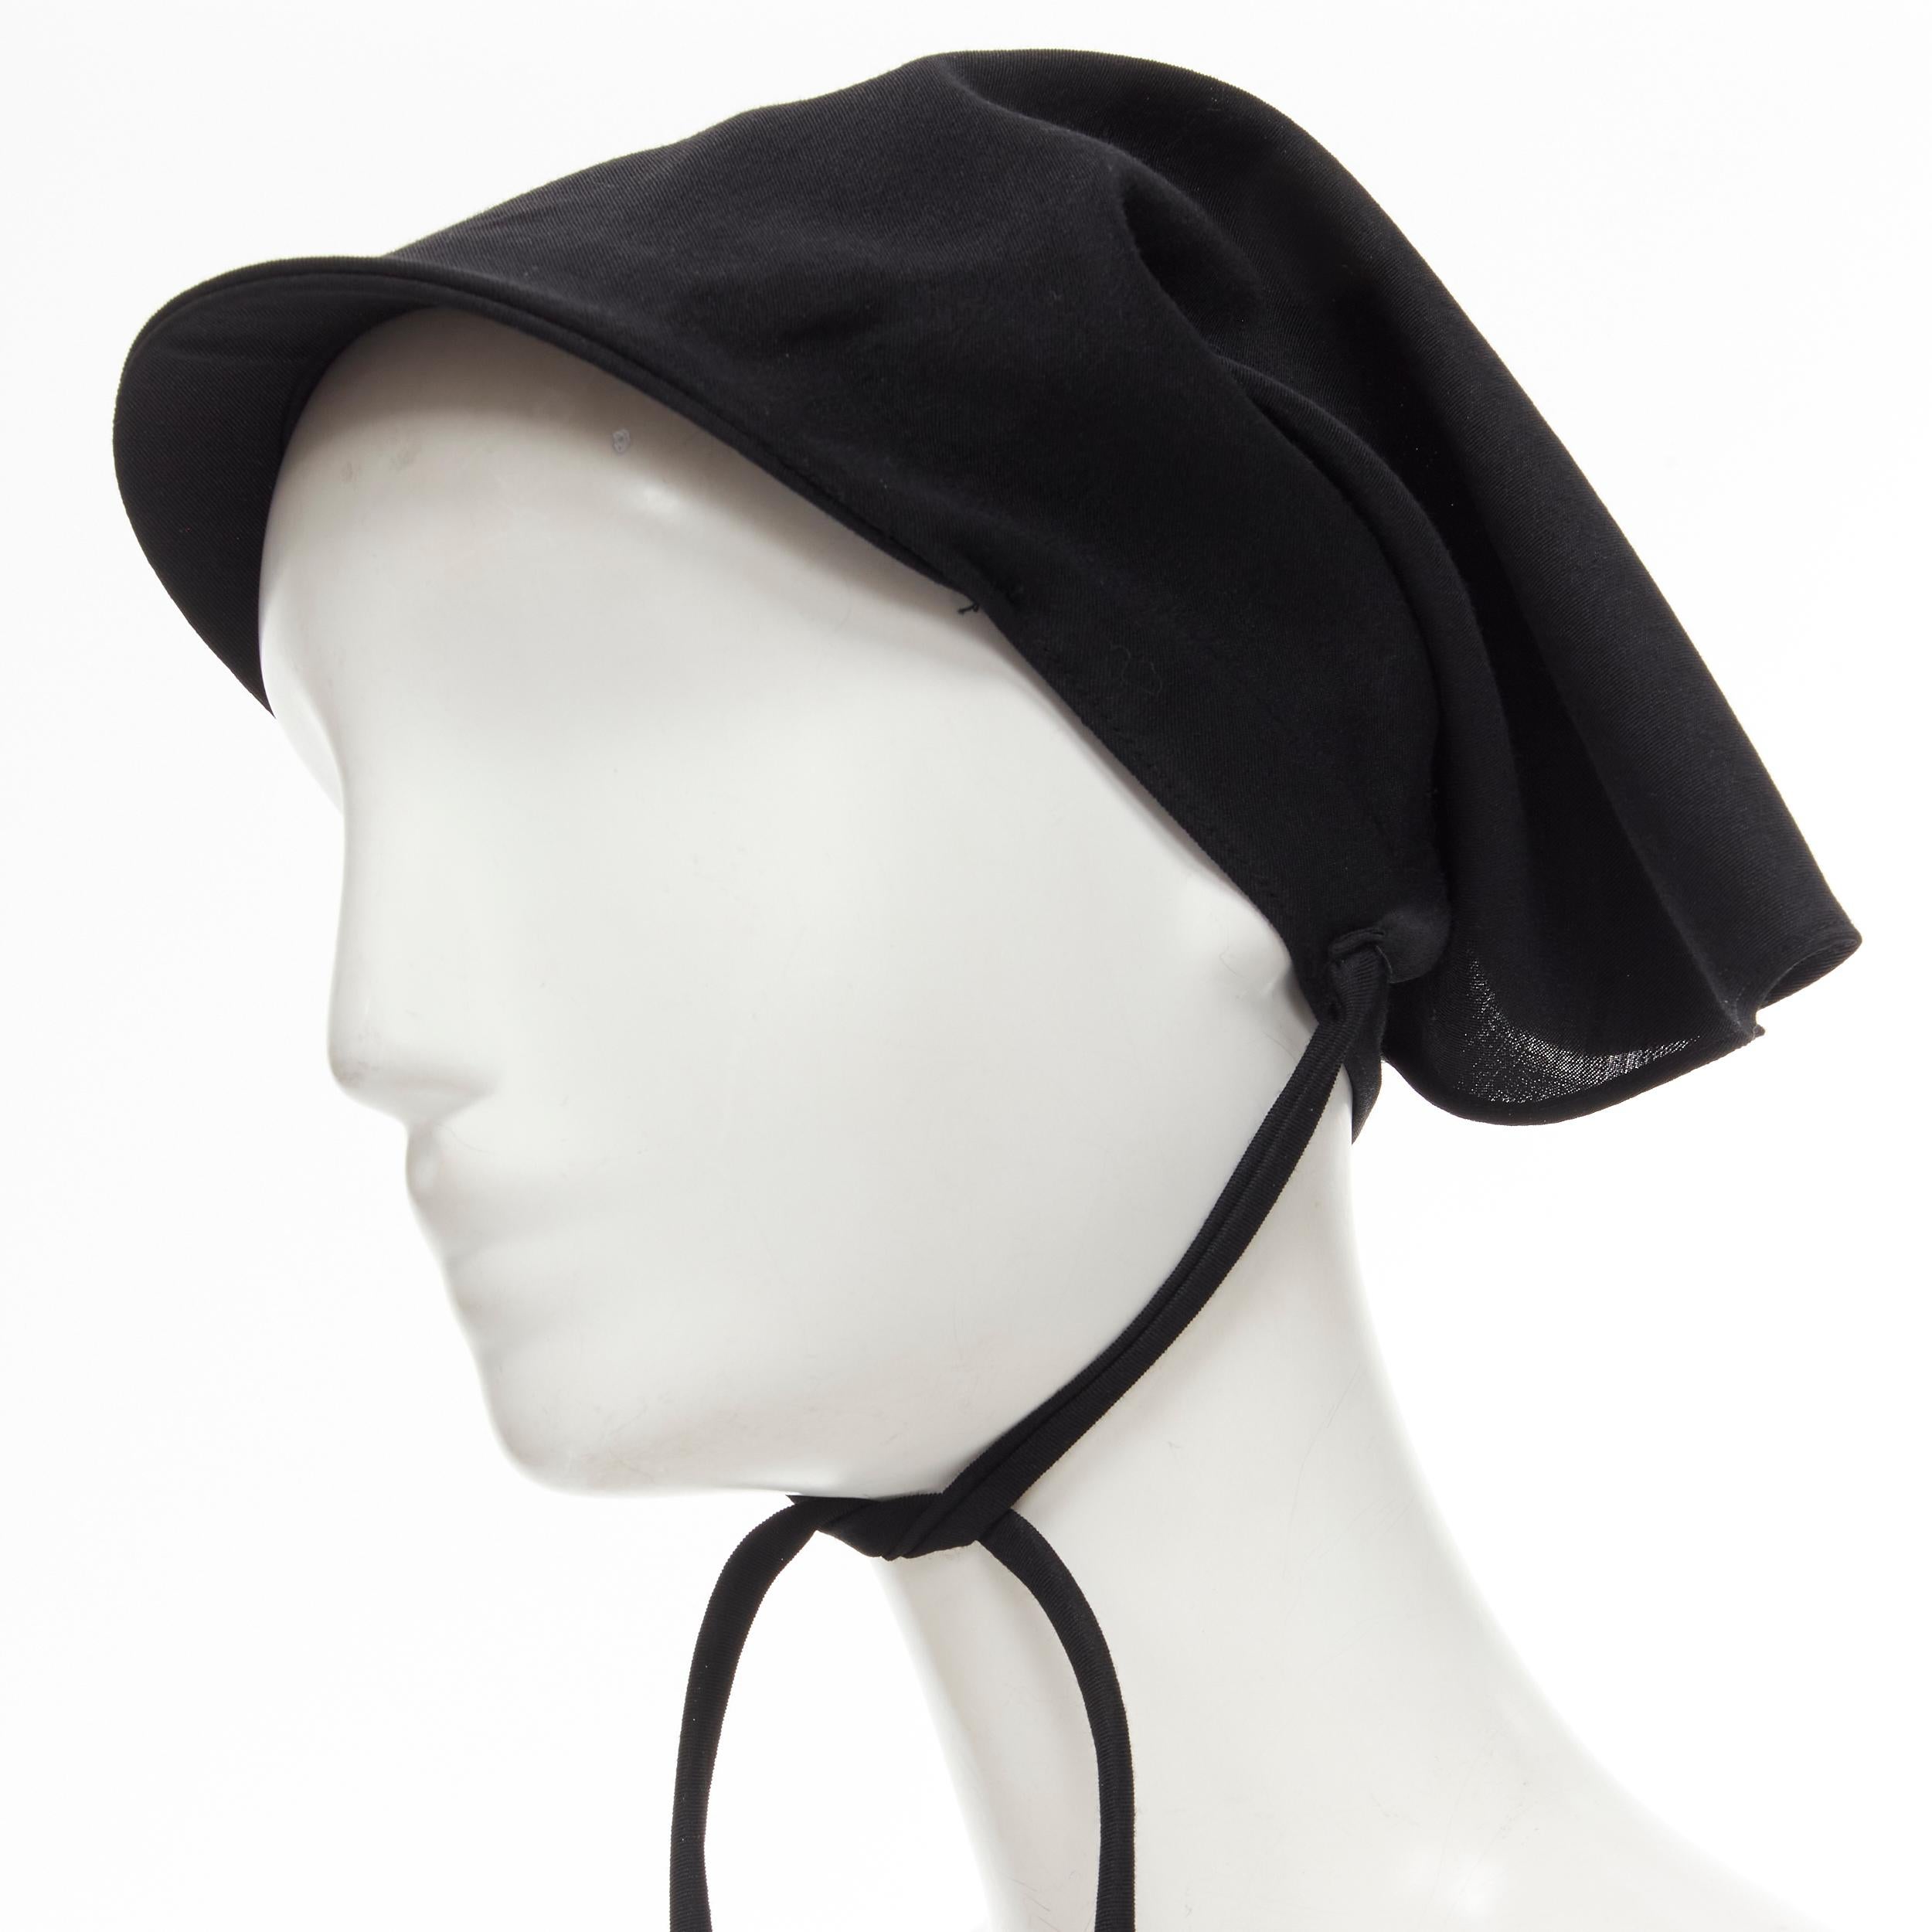 YOHJI YAMAMOTO 1980's Vintage black wool apostolnik wimple headscarf nurse hat 
Reference: CRTI/A00653 
Brand: Yohji Yamamoto 
Designer: Yohji Yamamoto 
Collection: 1980s 
Material: Wool 
Color: Black 
Pattern: Solid 
Closure: Tie 
Extra Detail: